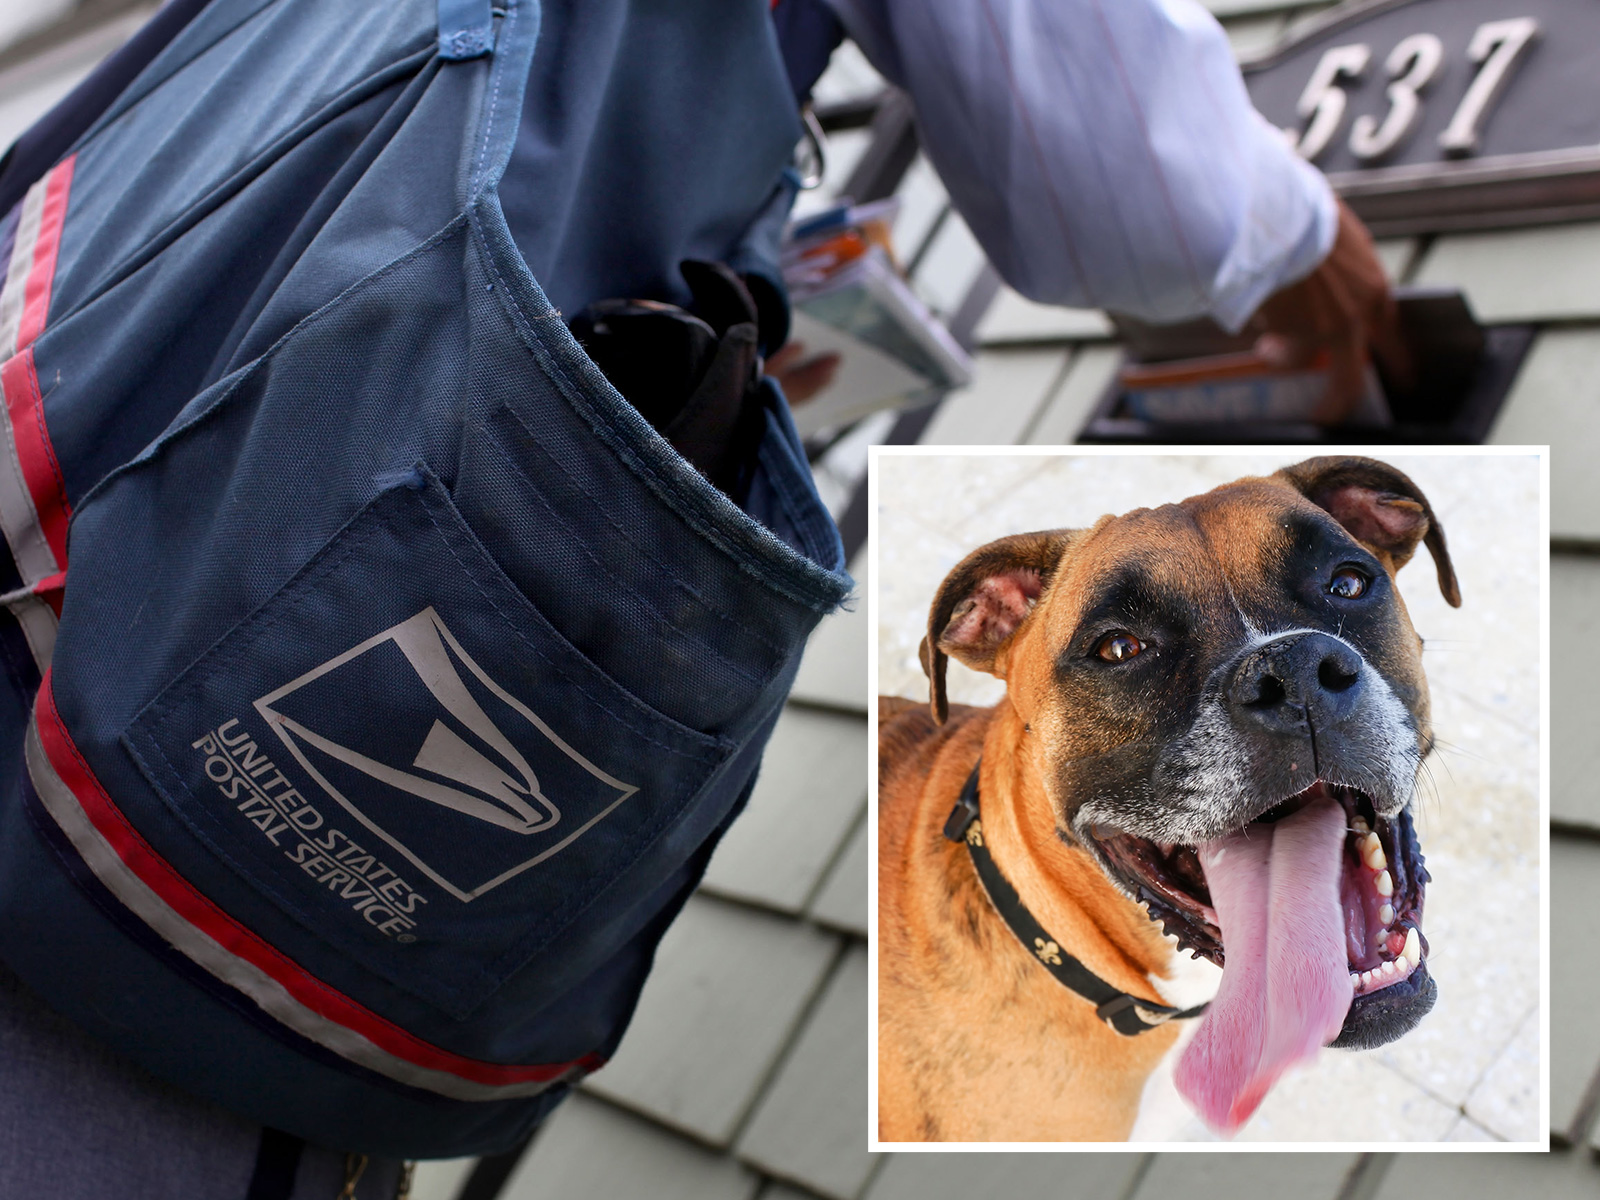 Spate Of 'Vicious' Dog Attacks On Postal Workers Leaves Locals Without Mail